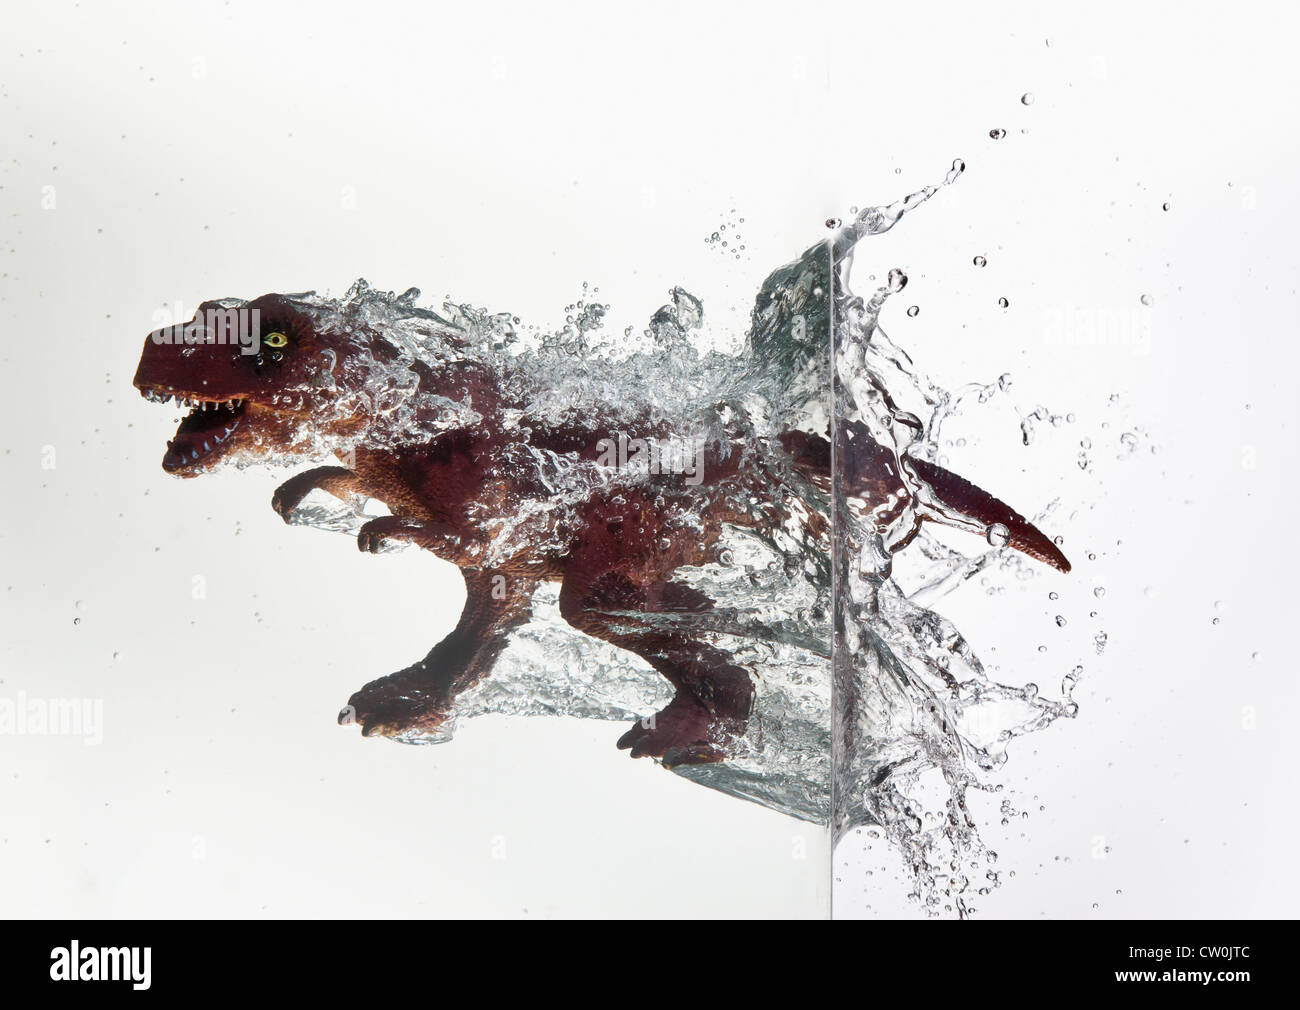 Toy dinosaur plunging into water Stock Photo